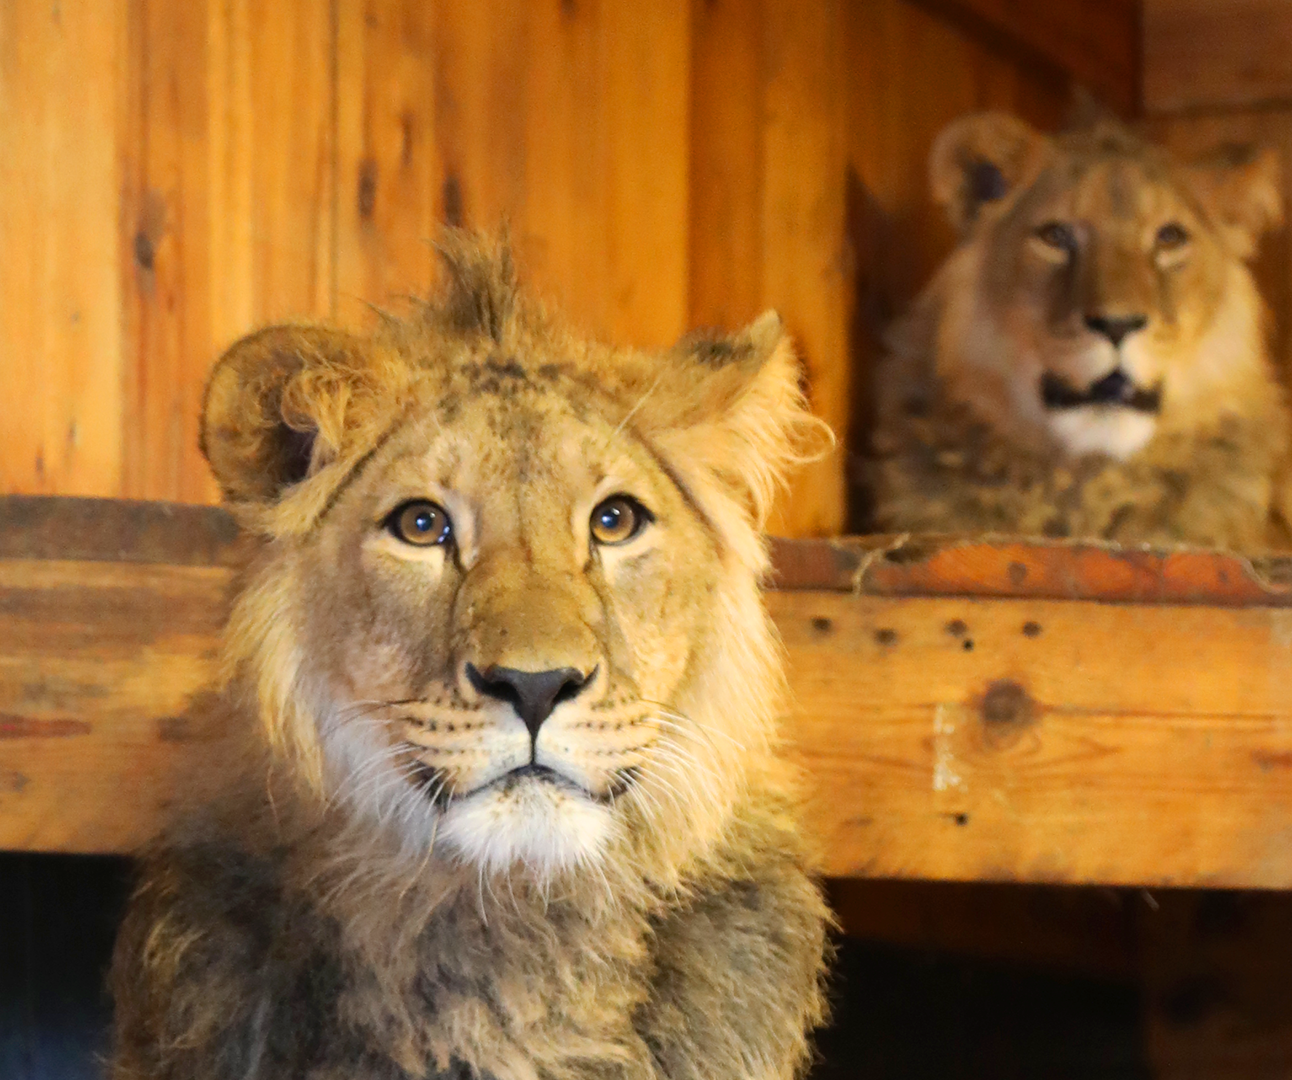 A young male lions sits facing the camera, while a second young male lion sits on a wooden platform behind him